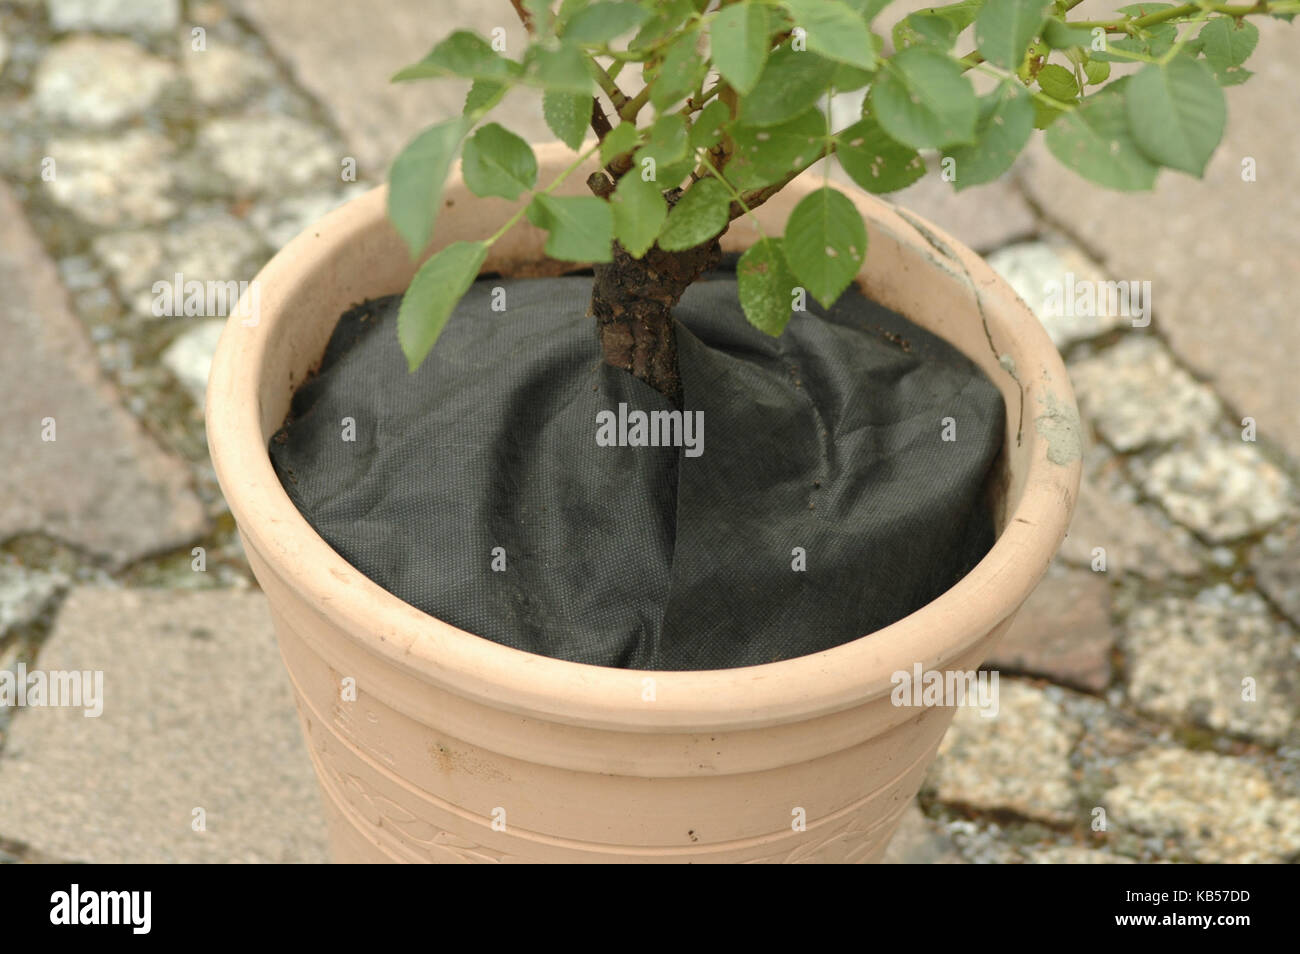 step by step instructions, plant tub free of weeds Stock Photo